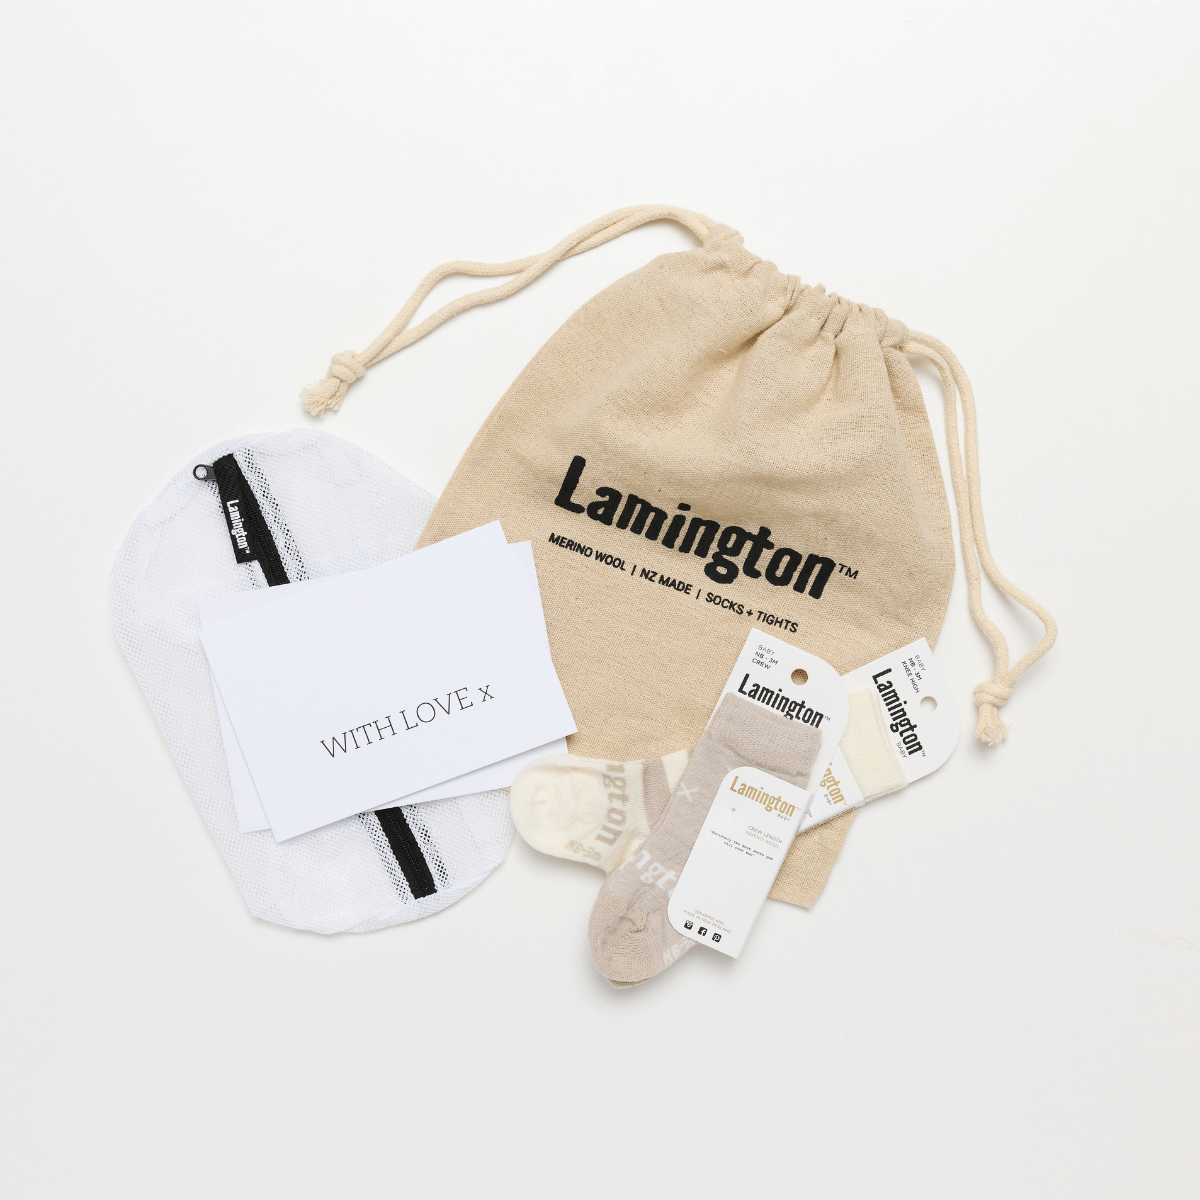 packaged merino wool socks with lamington branded laundry bag, gift card and linen bag